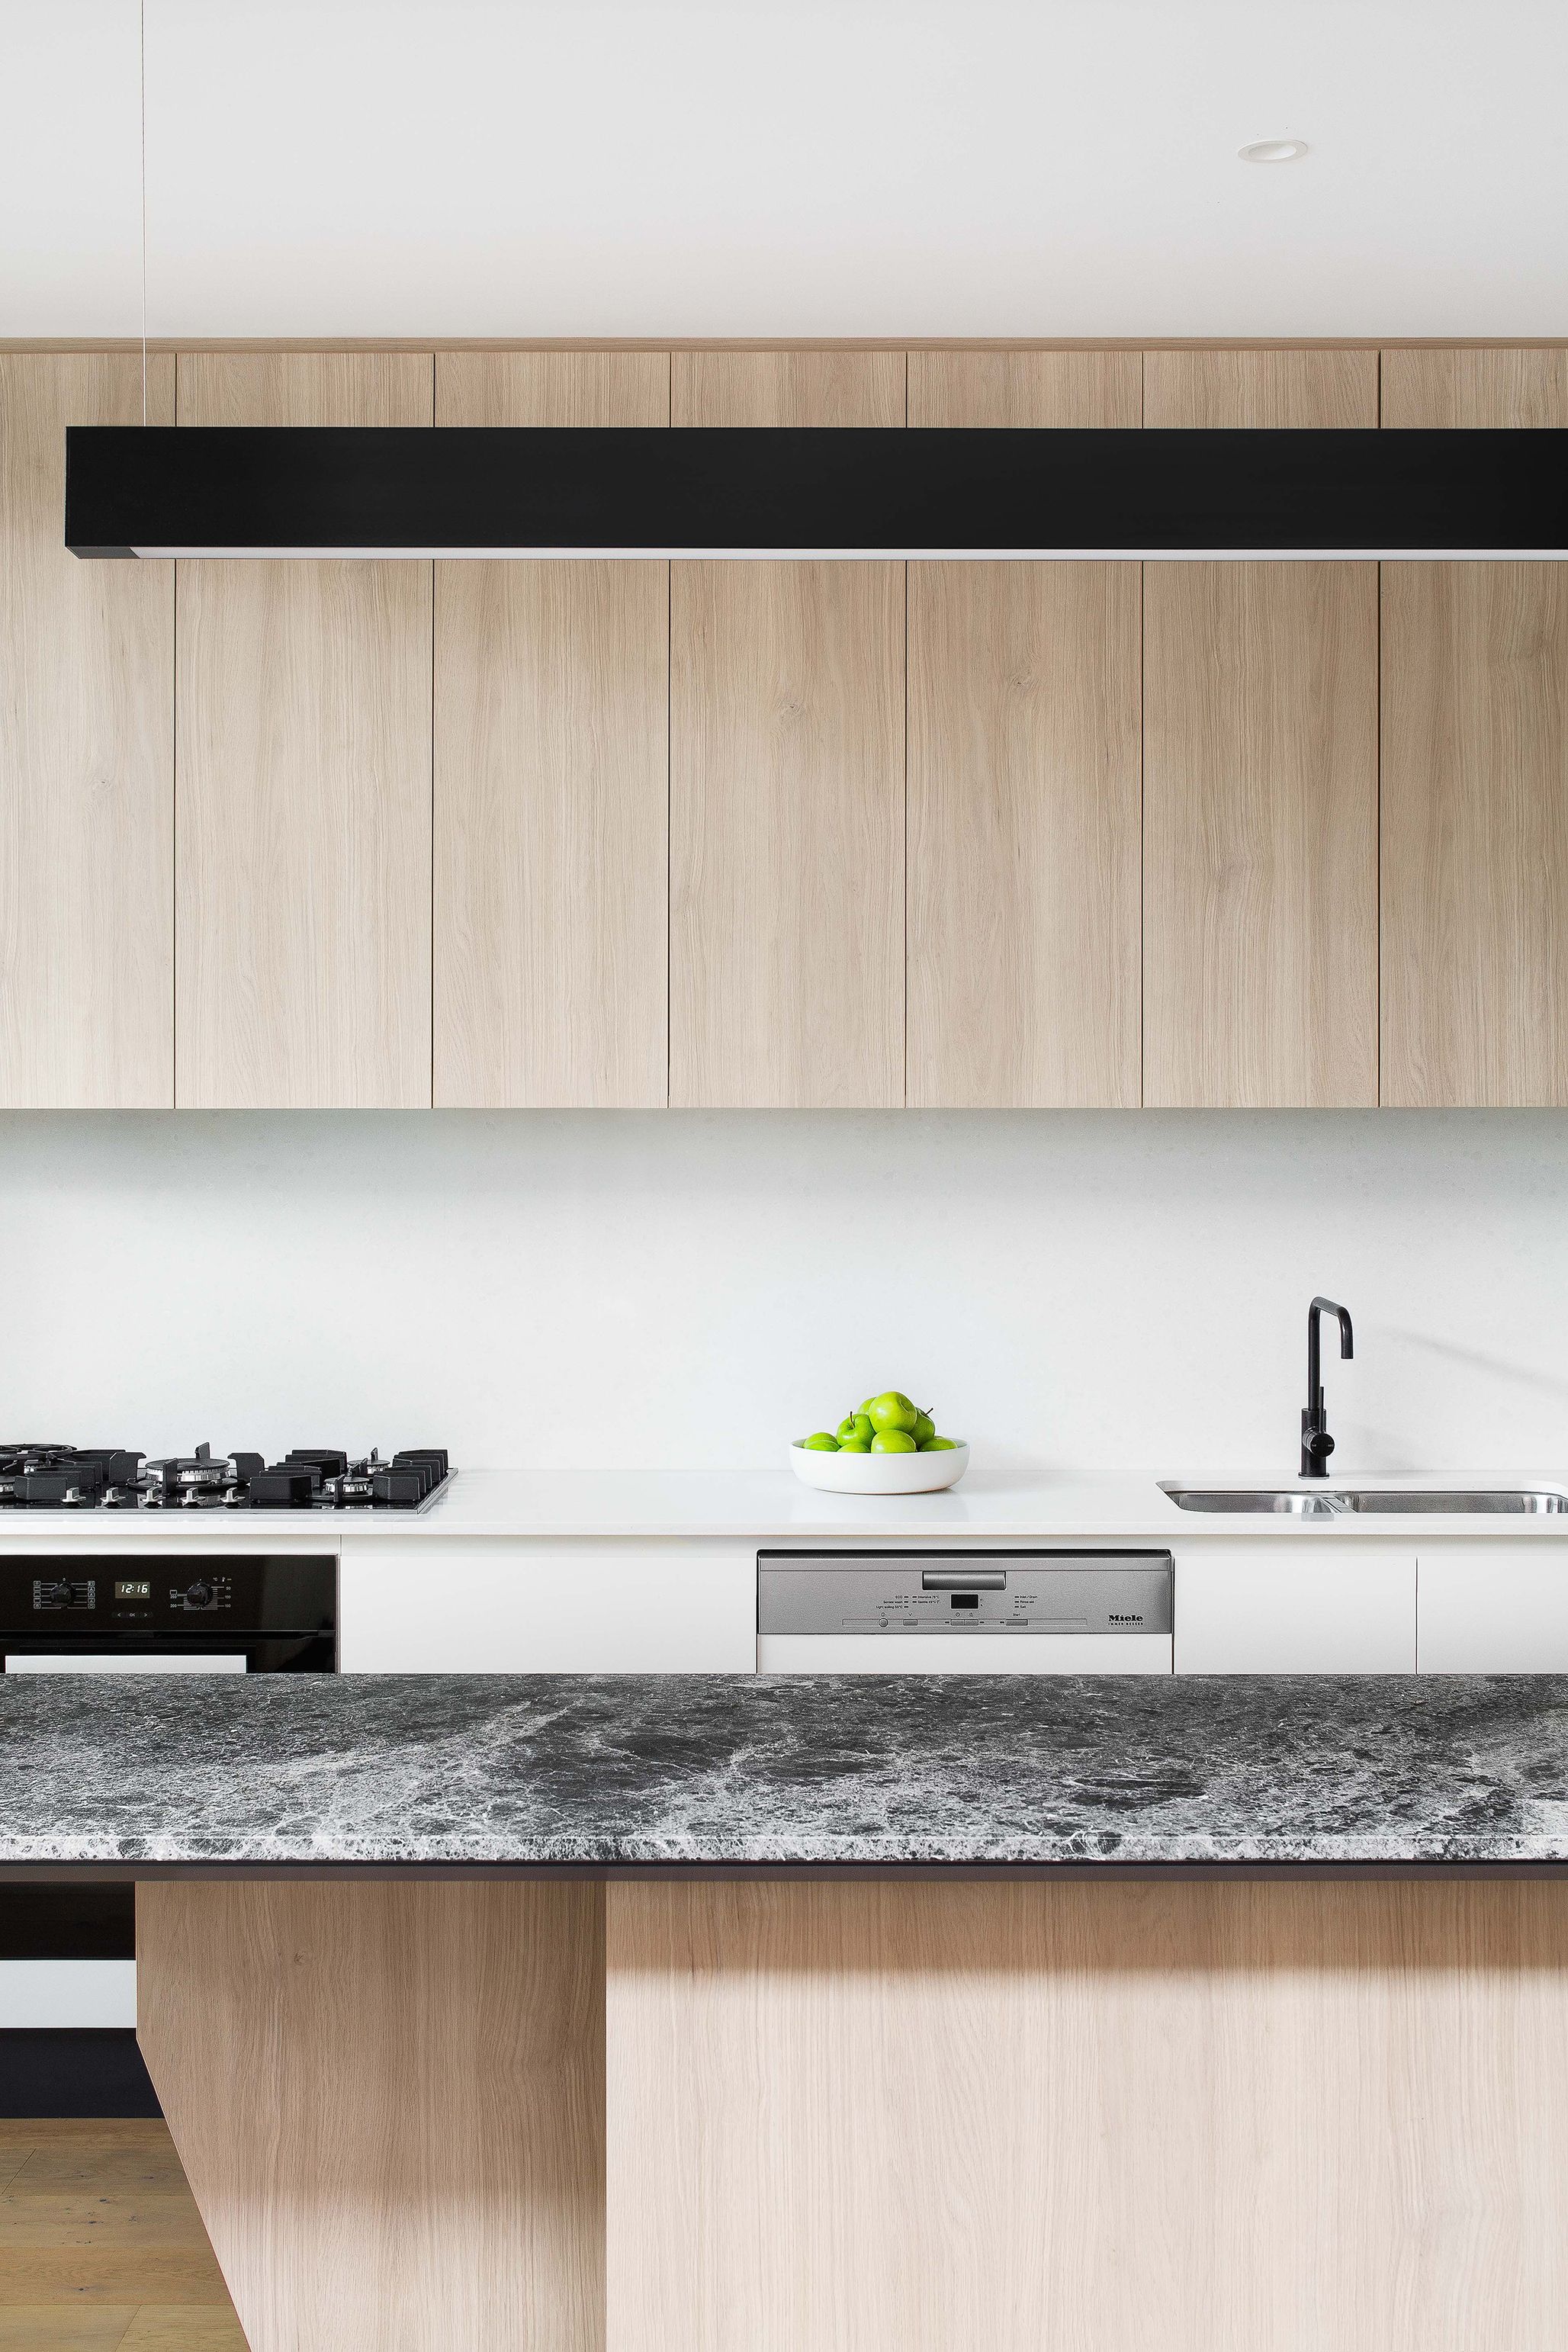 image of East Melbourne terrace - subtle and textured kitchen as part of the new addition